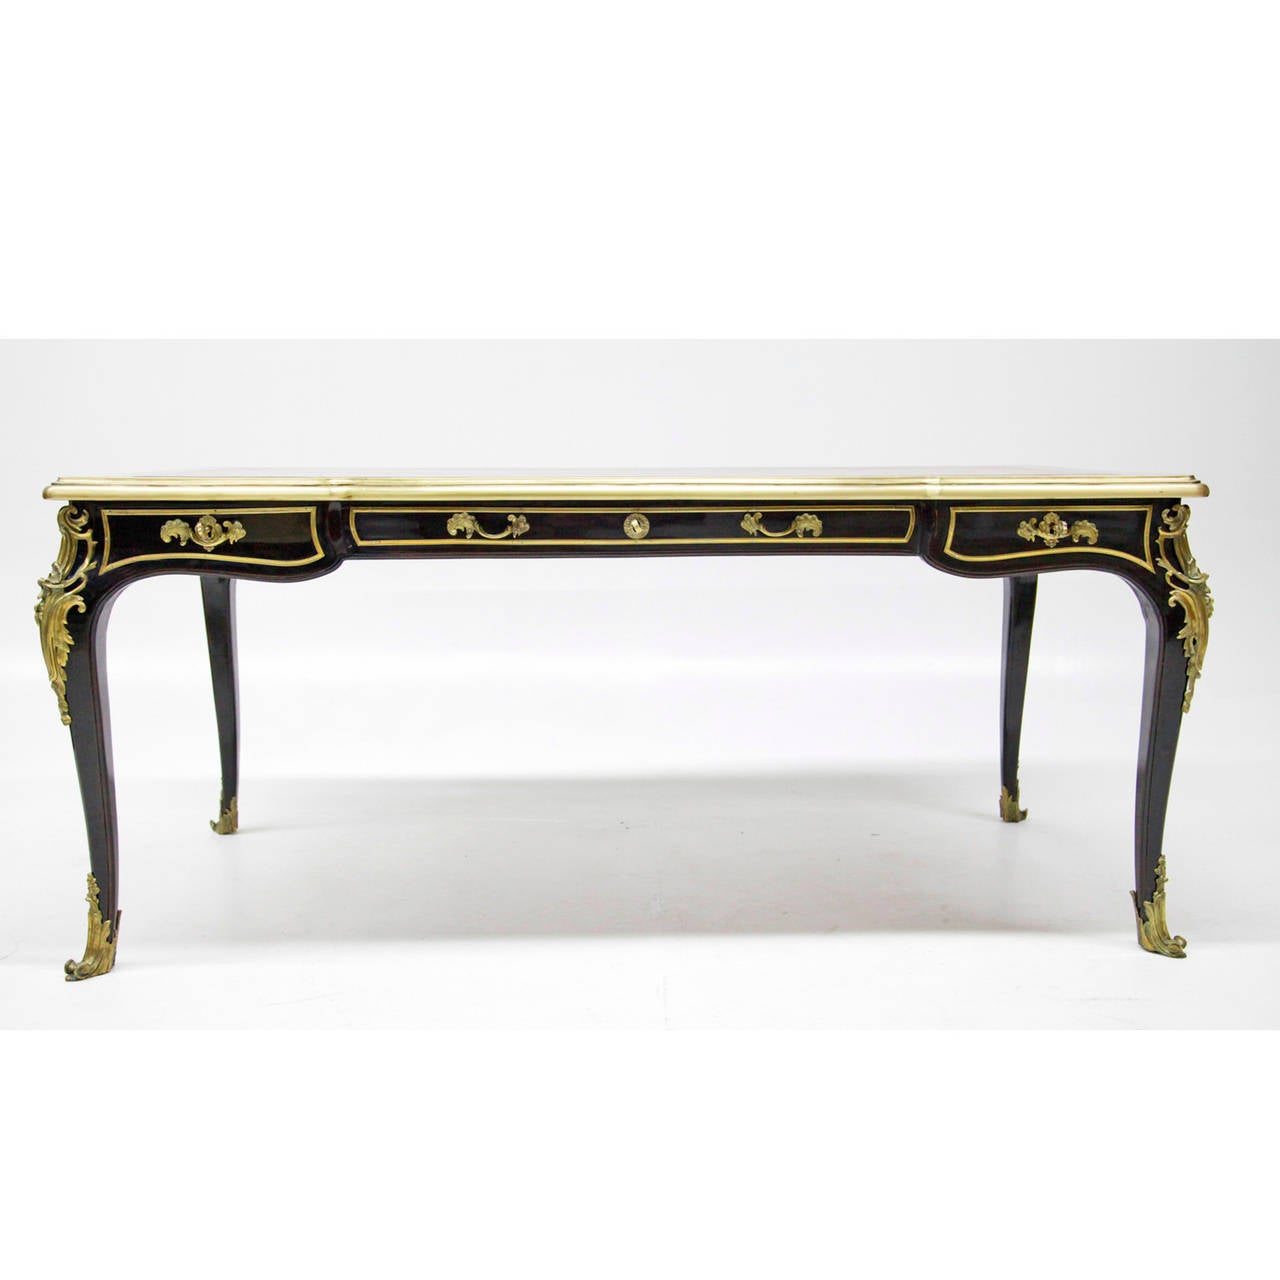 Magnificently french Bureau Plat, 2nd half of 19th Century.
Table in Louis XV style, from the time of Napoleon III.
The table is ebonised and with wonderful fire gilded bronze ornaments.
Oak drawers, old leather with beautiful patina on the